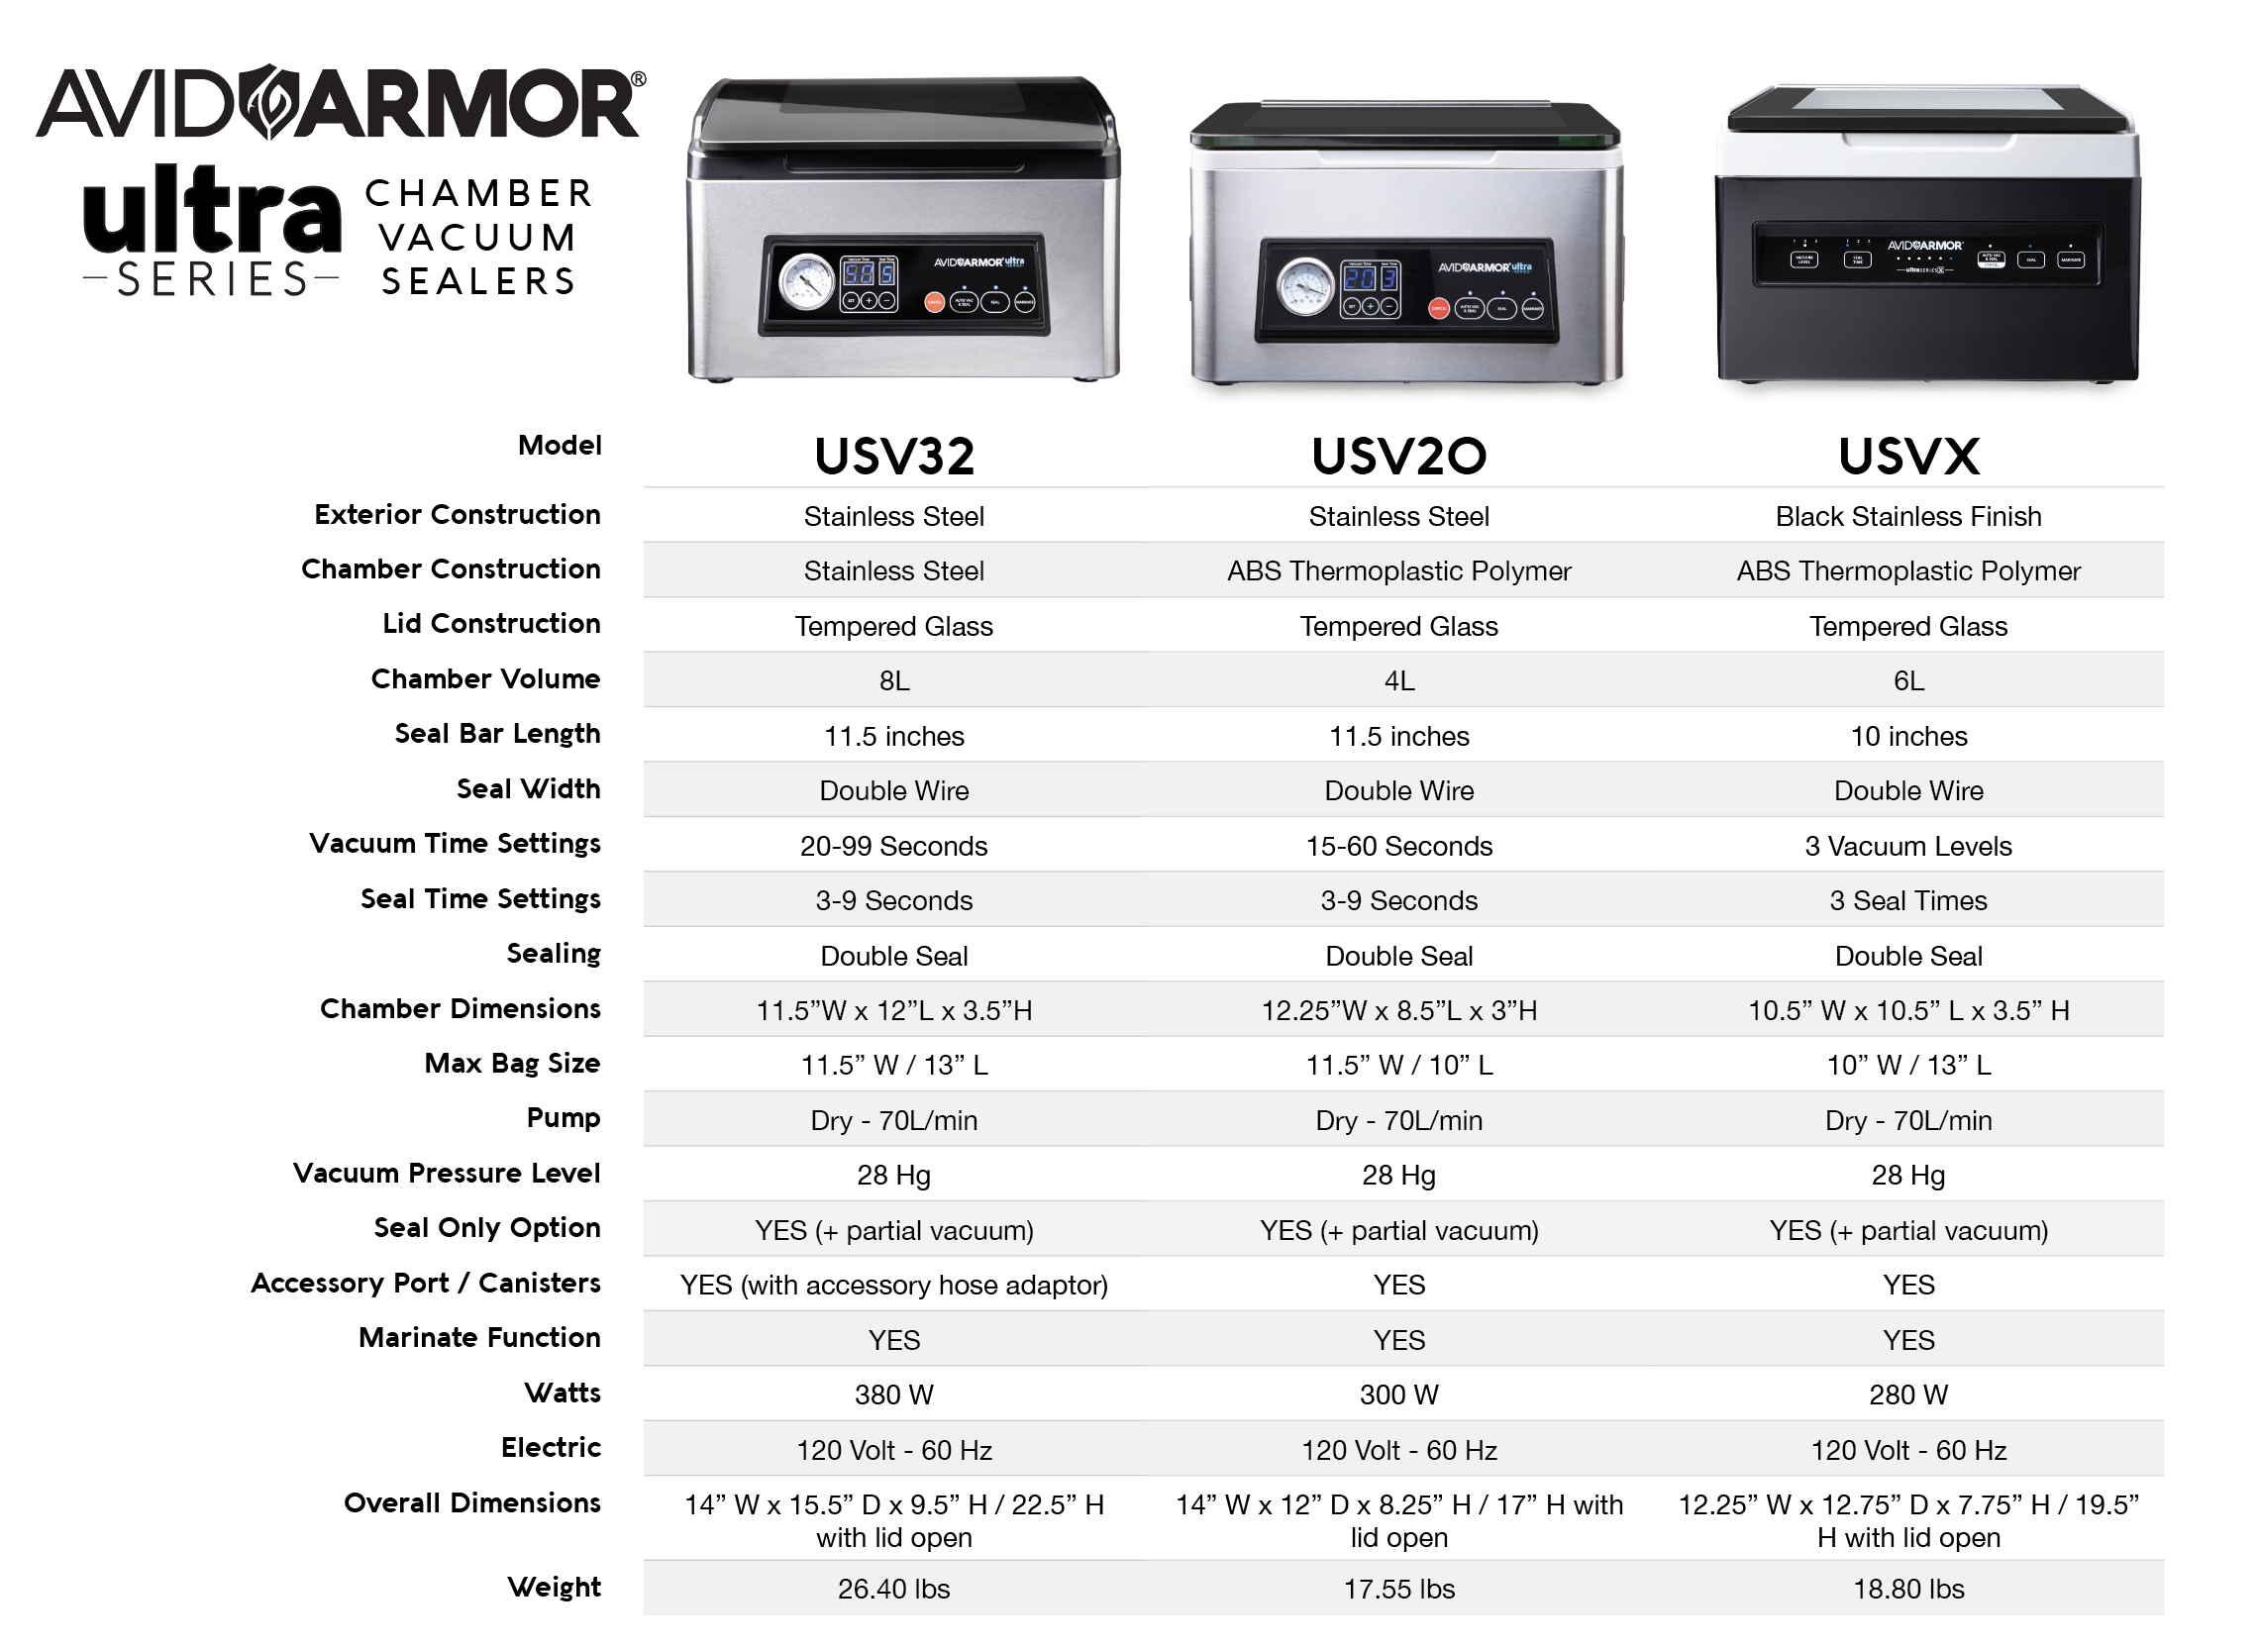 Side by Side Comparison of the USV20 to the USV32 - Avid Armor